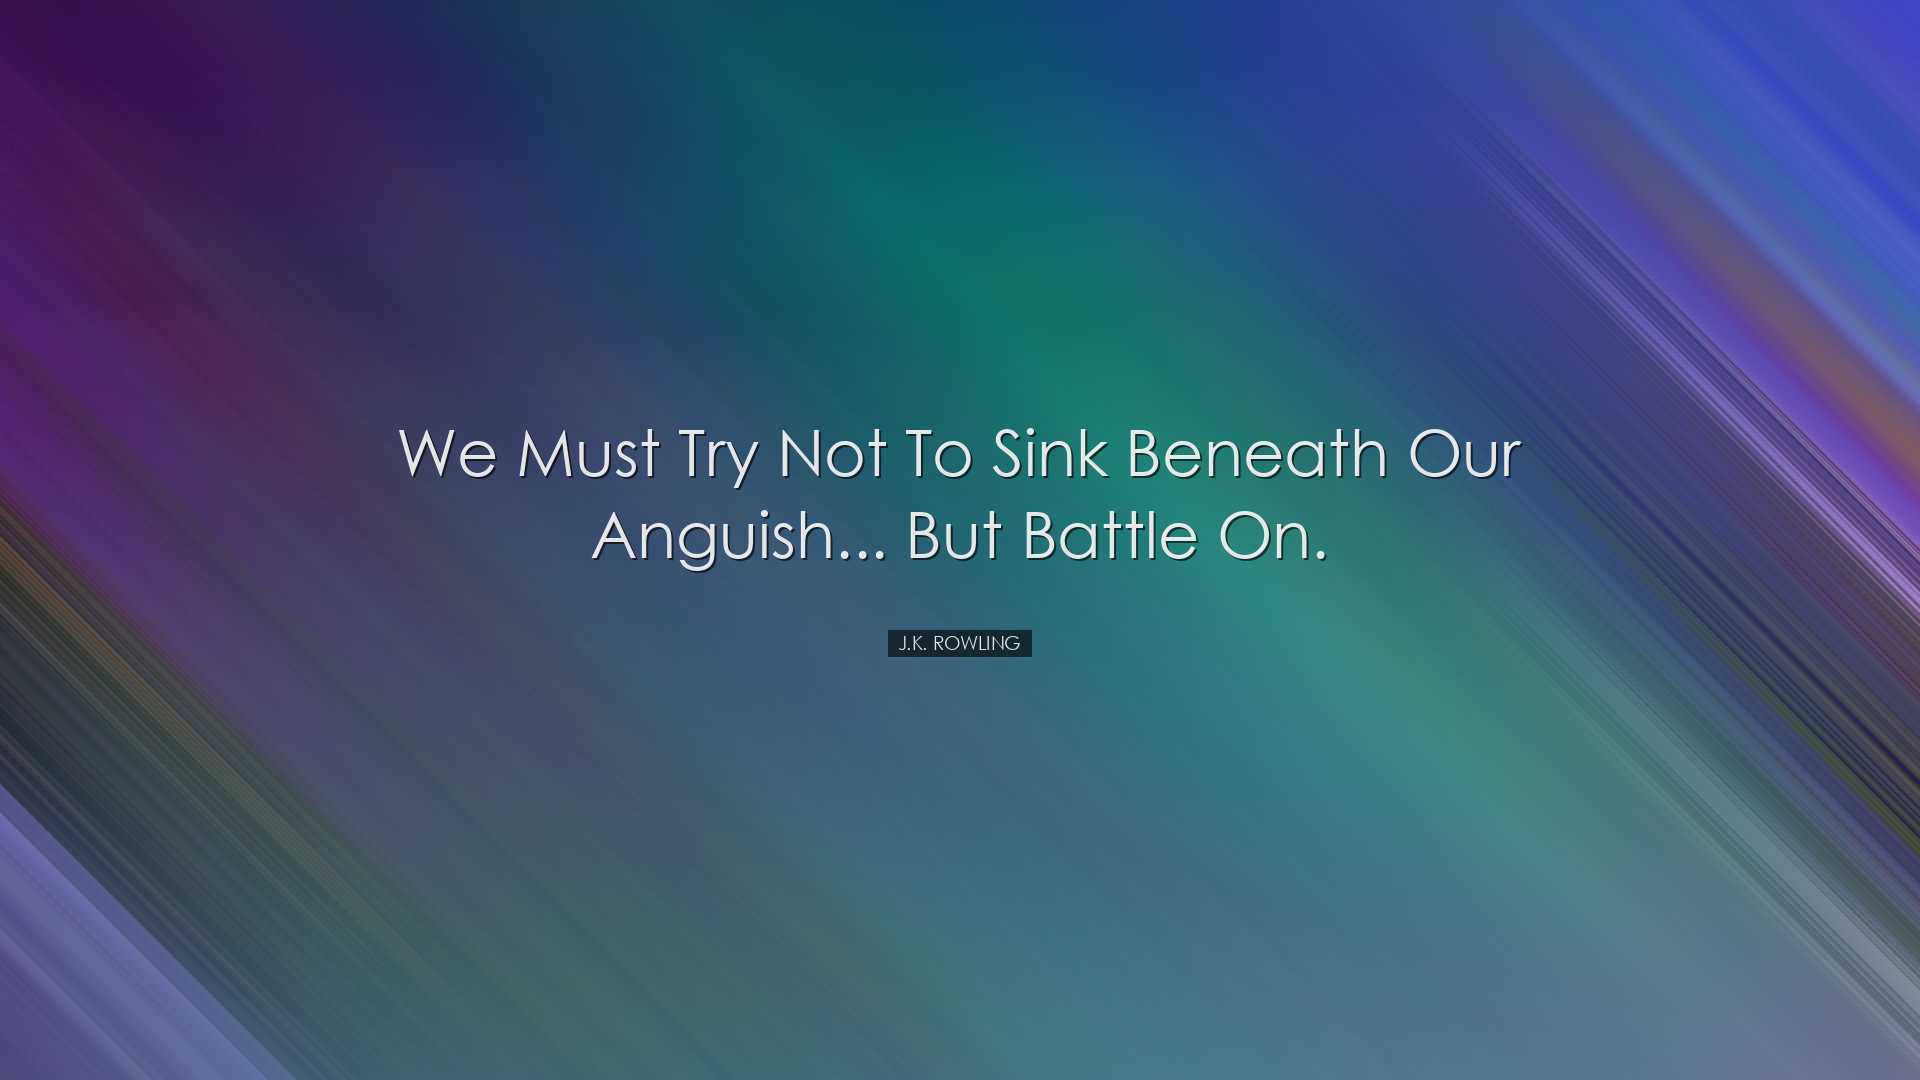 We must try not to sink beneath our anguish... but battle on. - J.